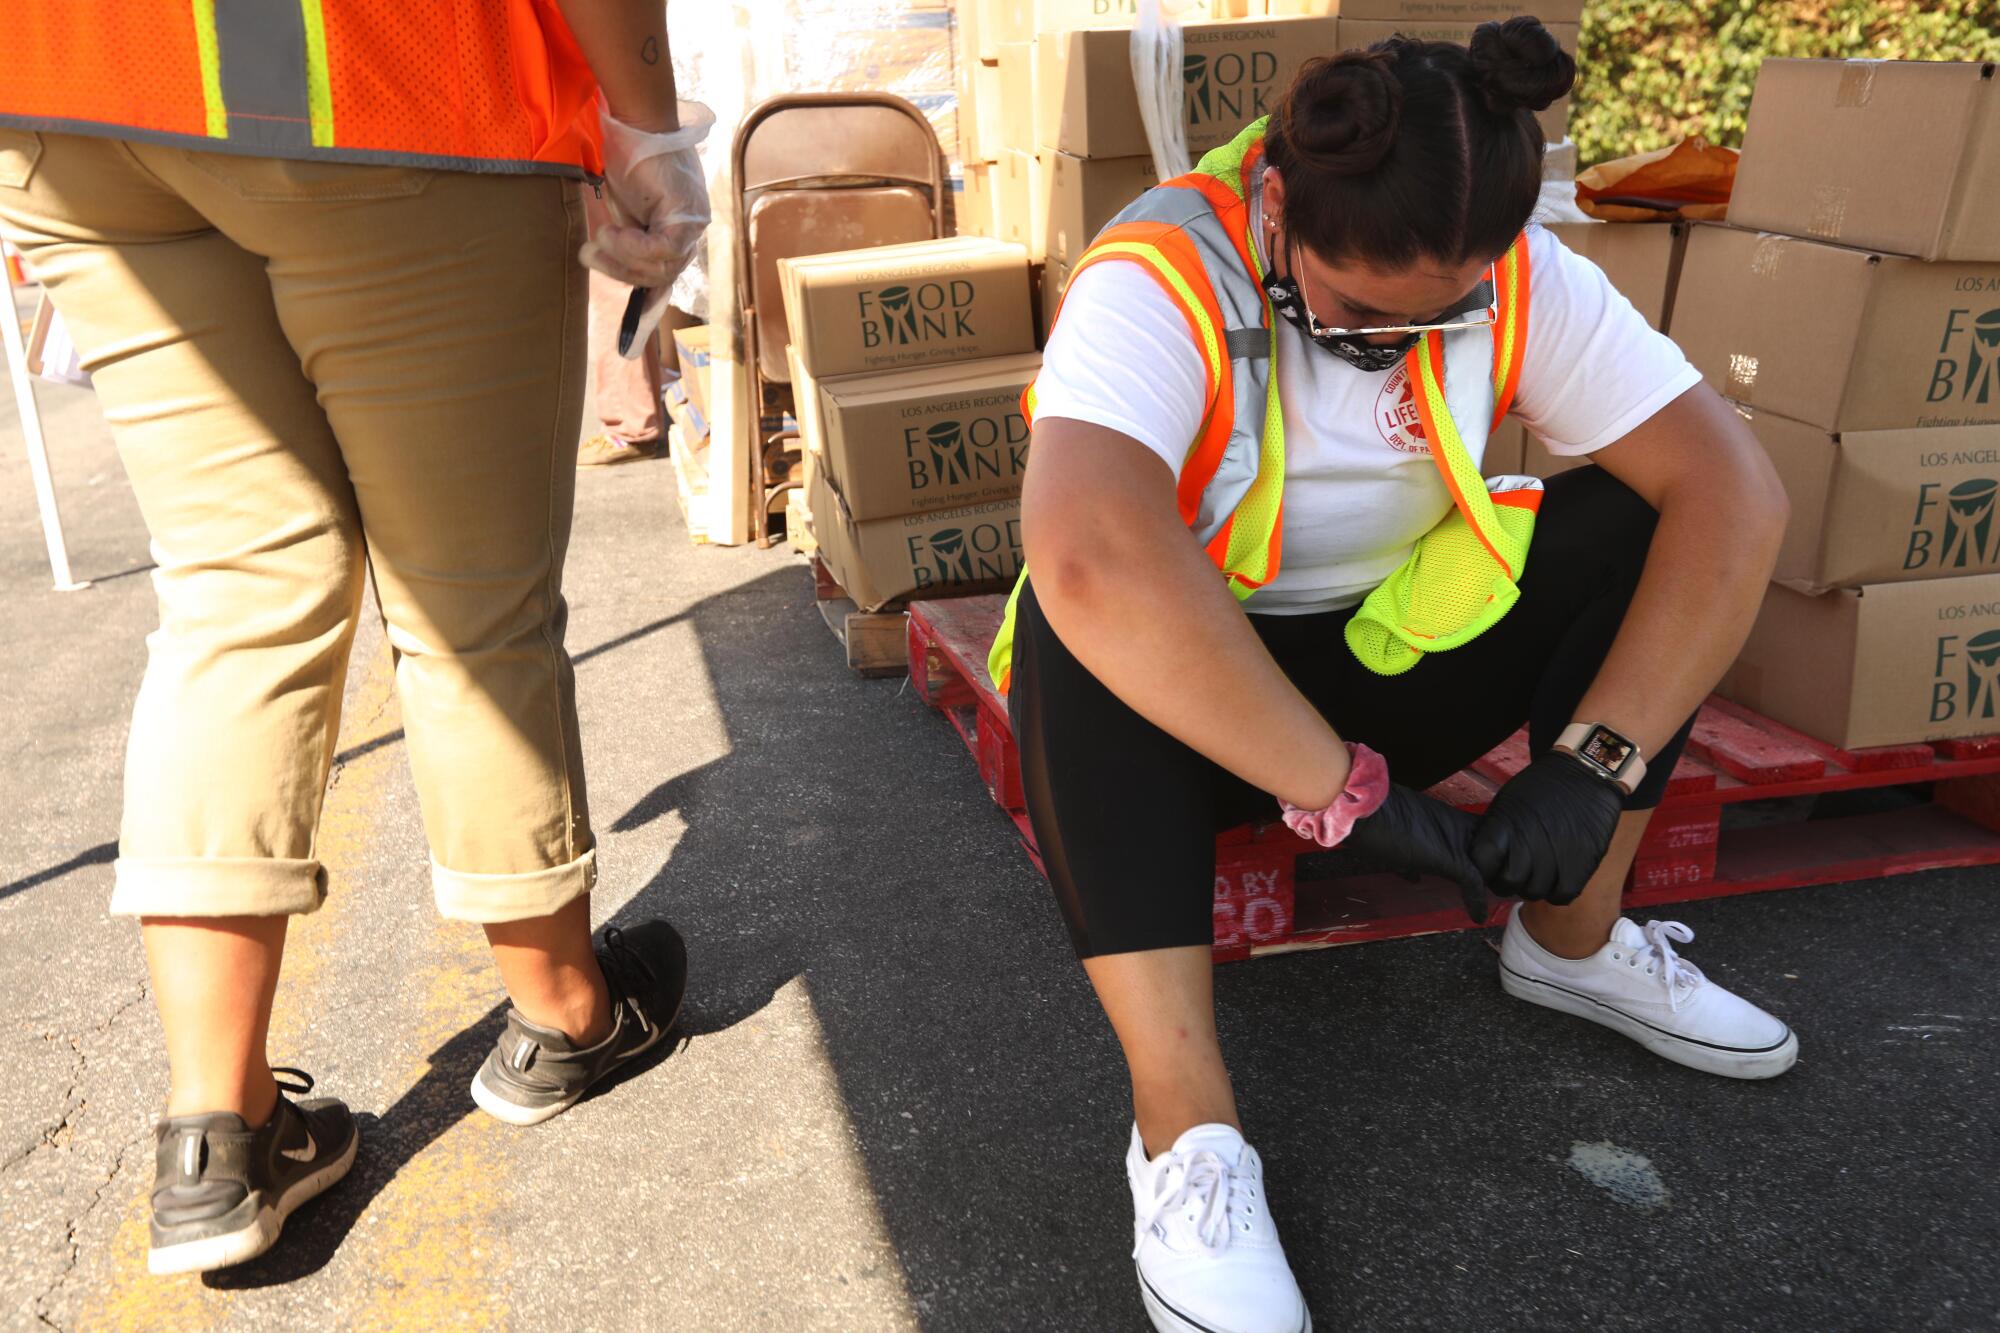 A woman in a high-vis vest sits on a wooden pallet next to cardboard boxes